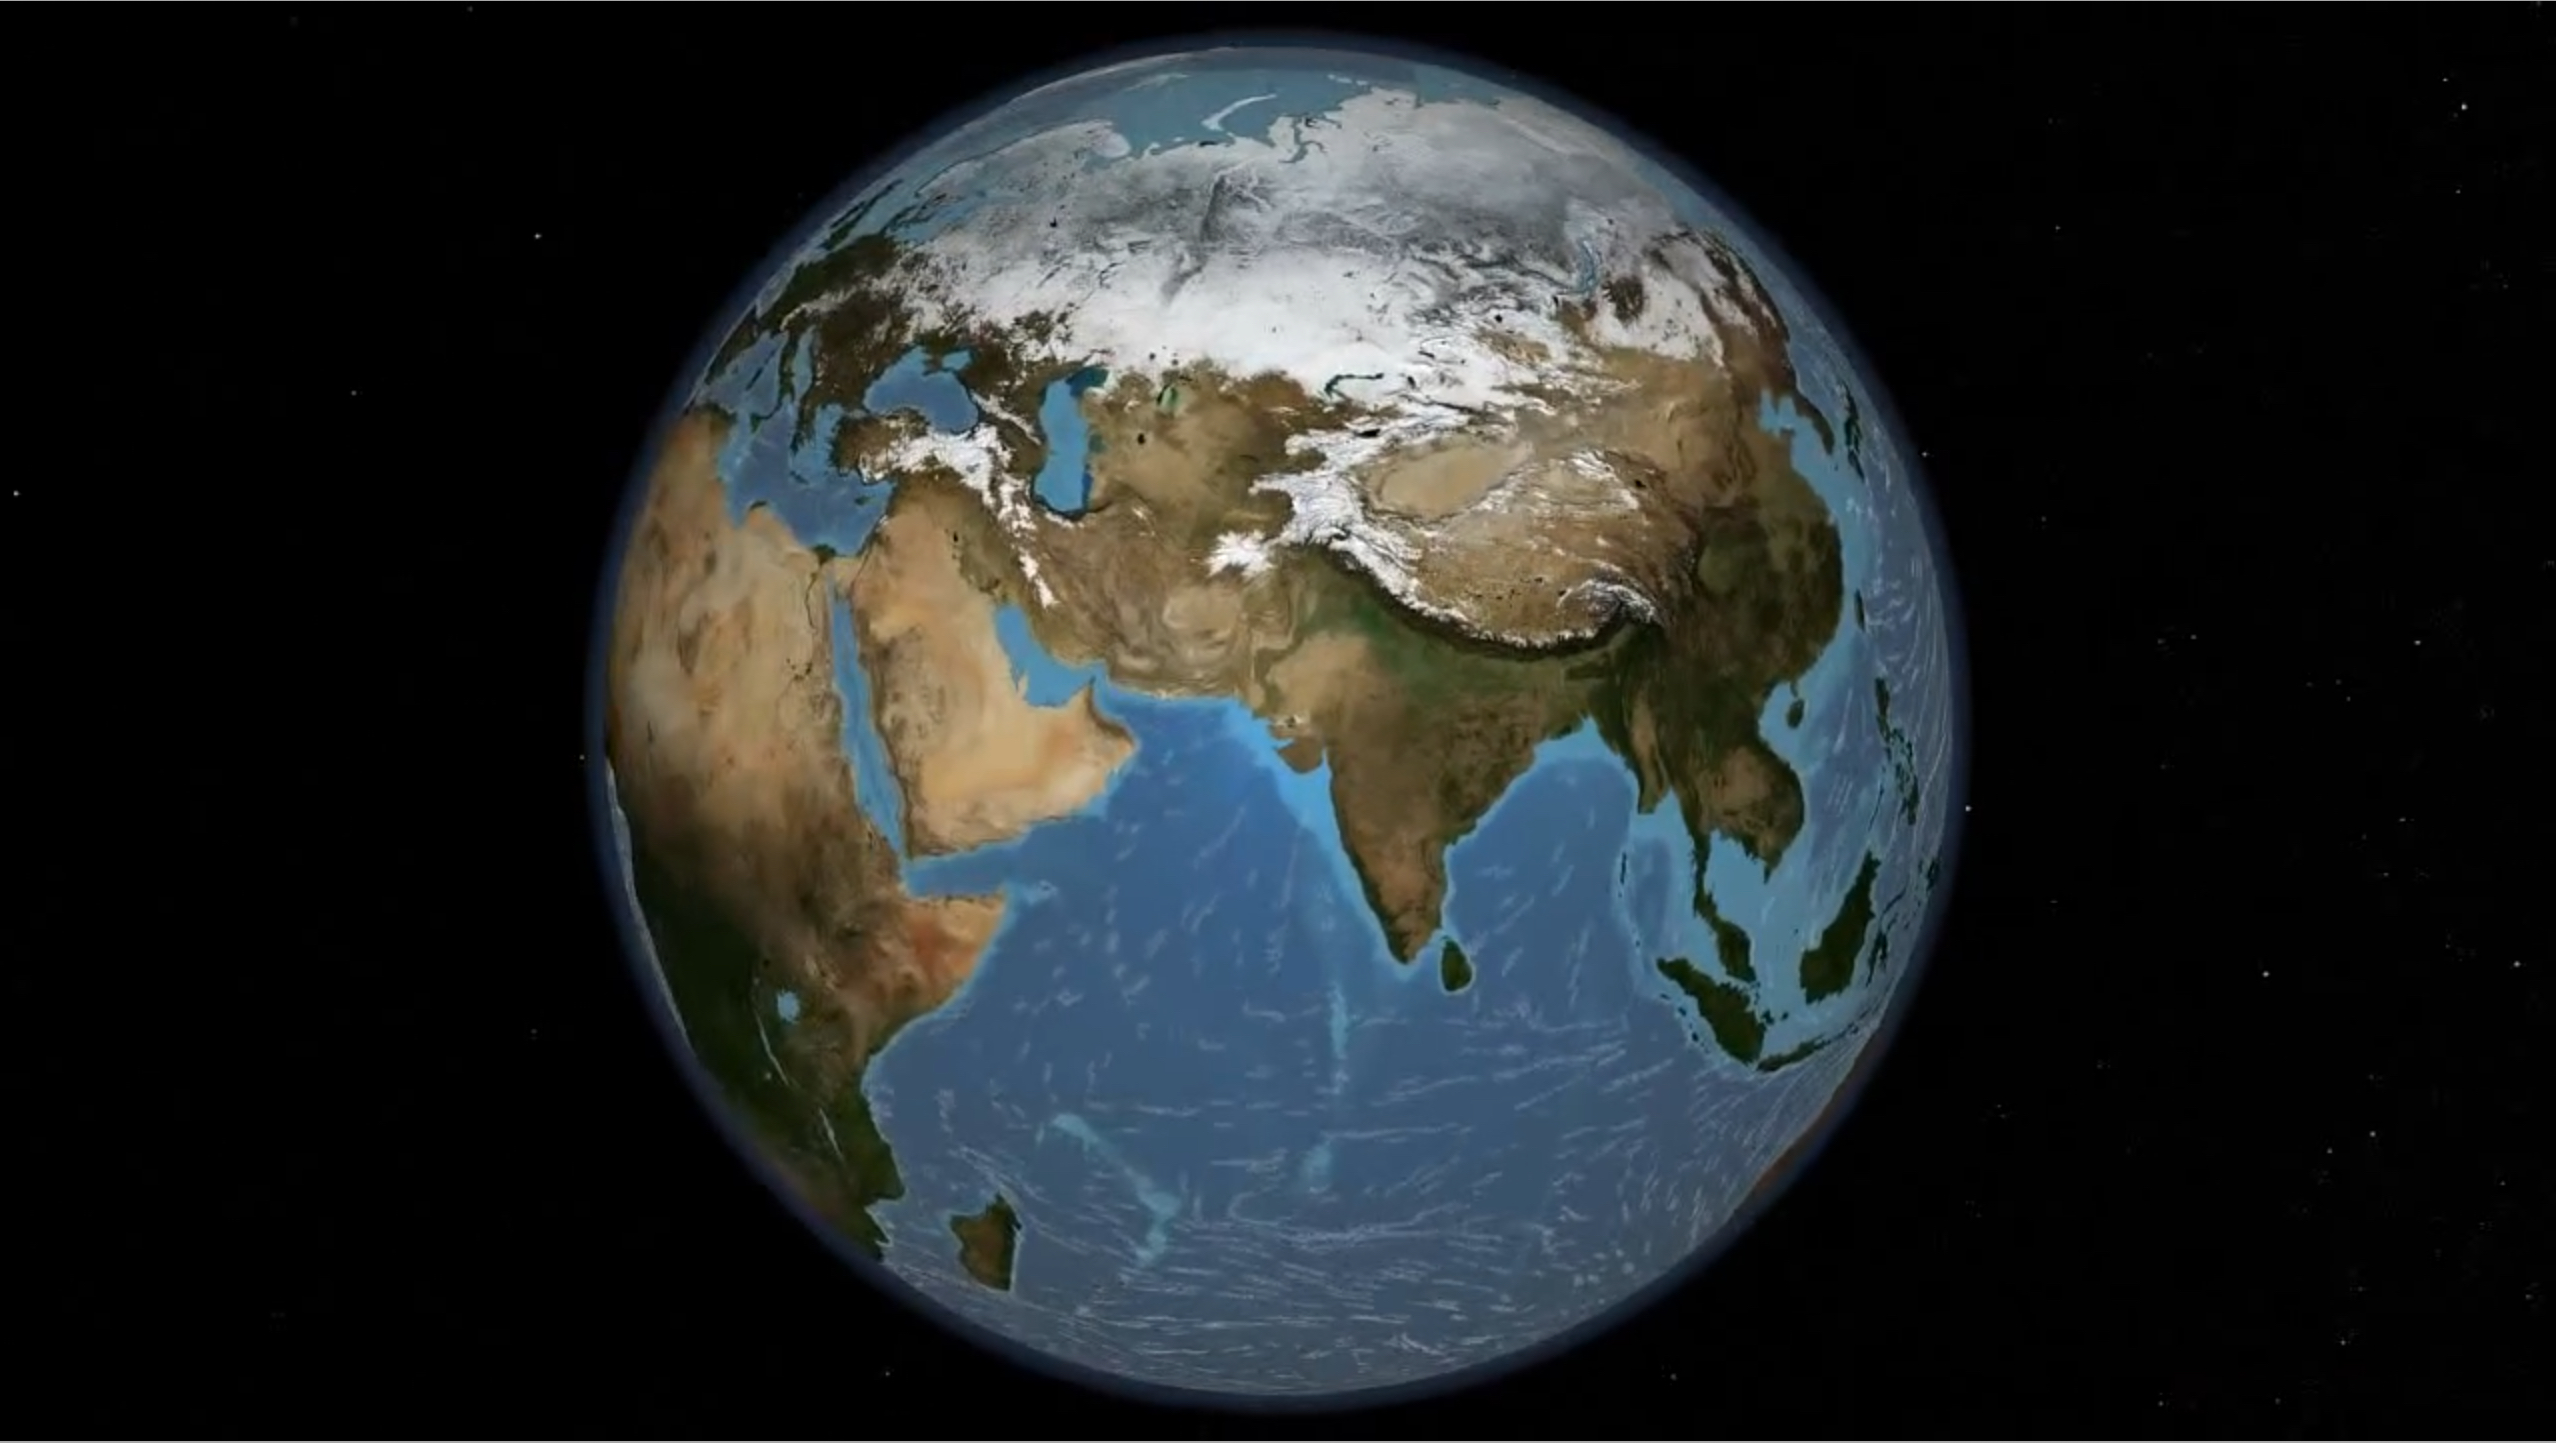 image of the Earth